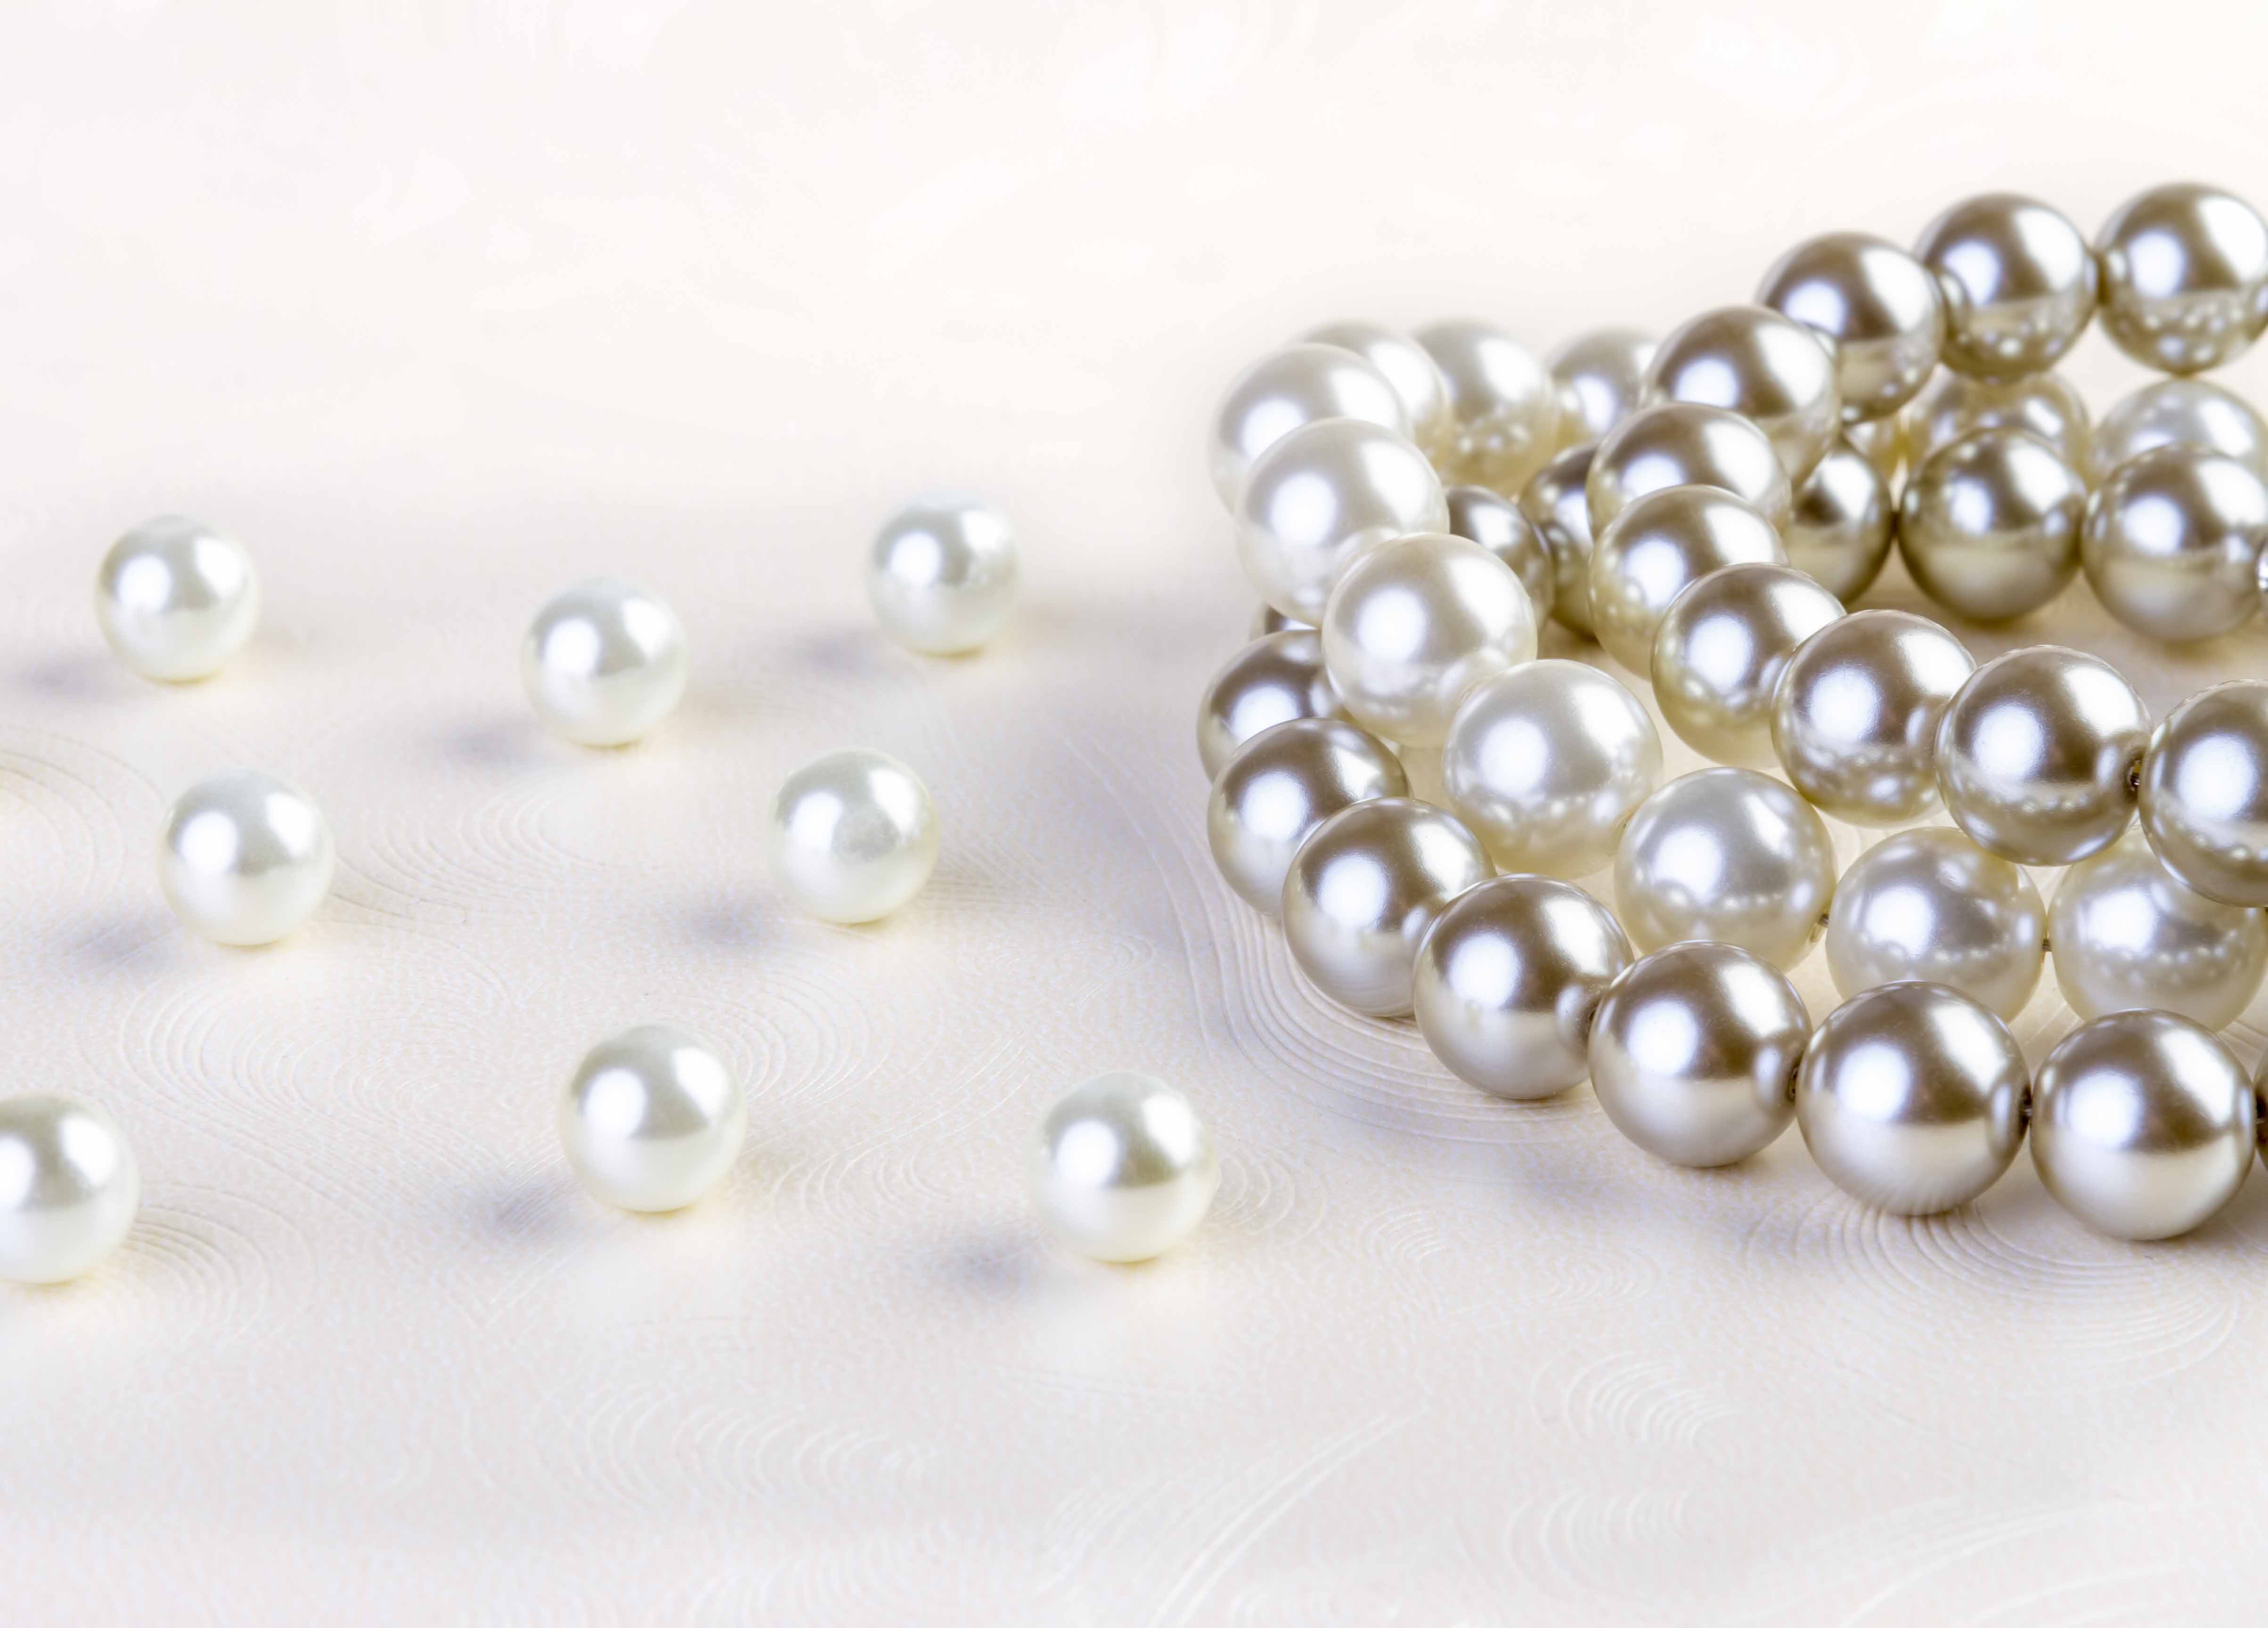 Silver and White pearls necklace on white paper background